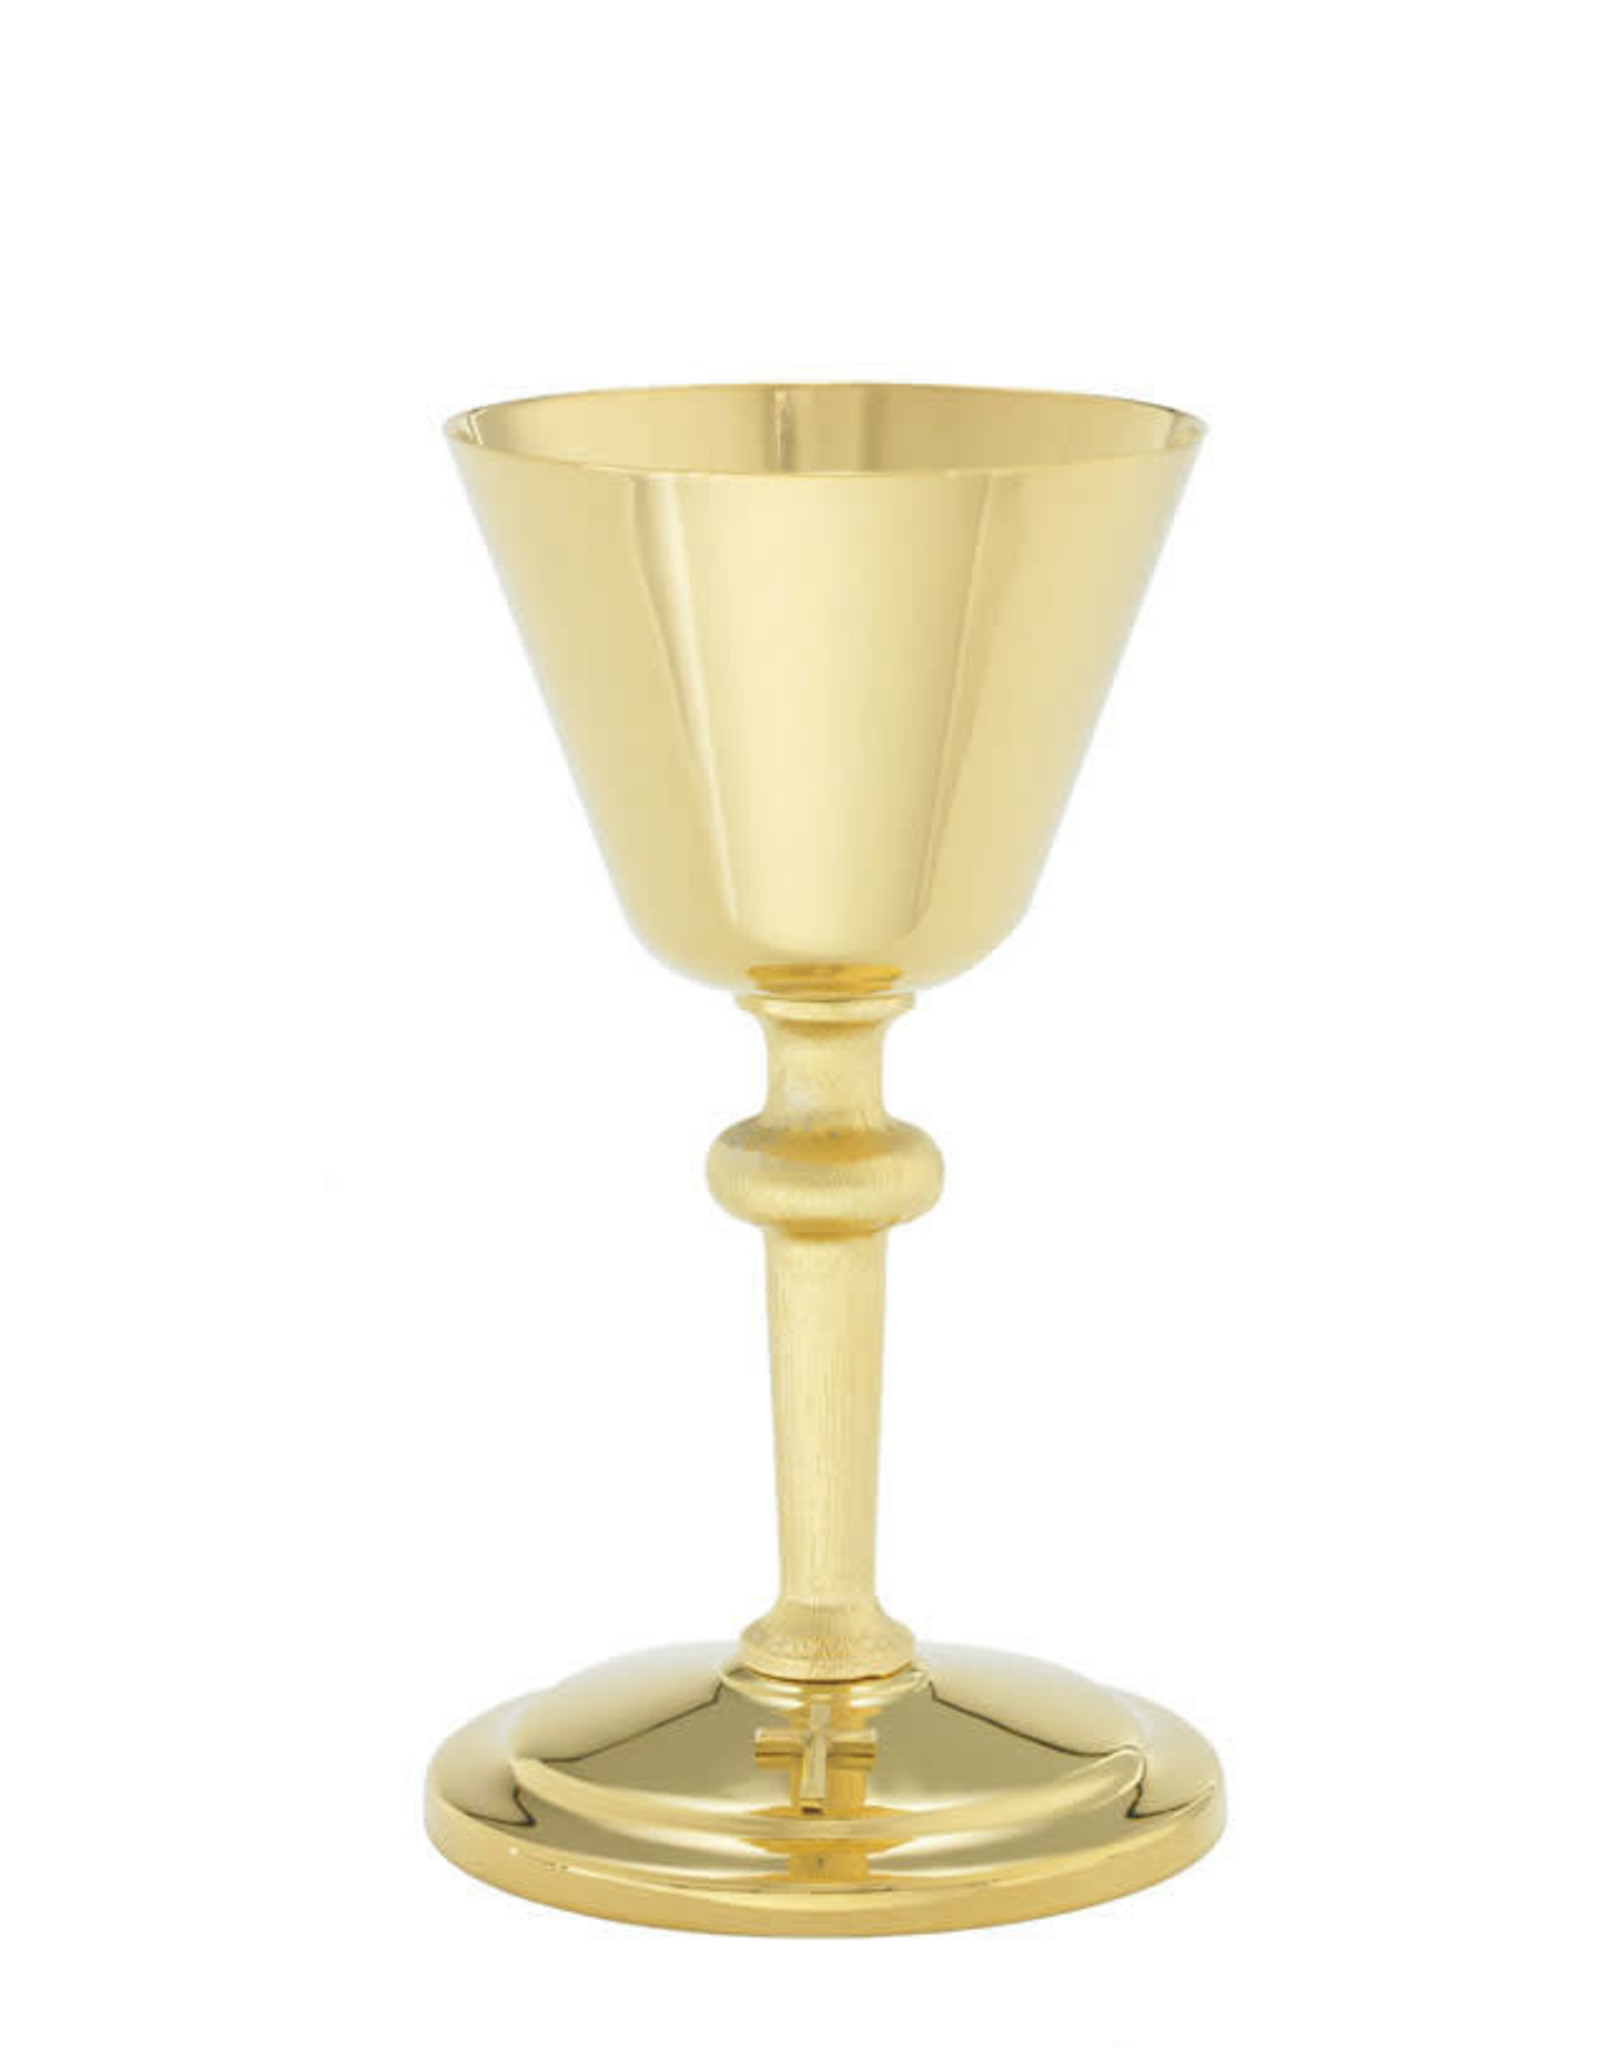 Alviti Creations Chalice Gold Plated 7-1/2" Ht, 8oz